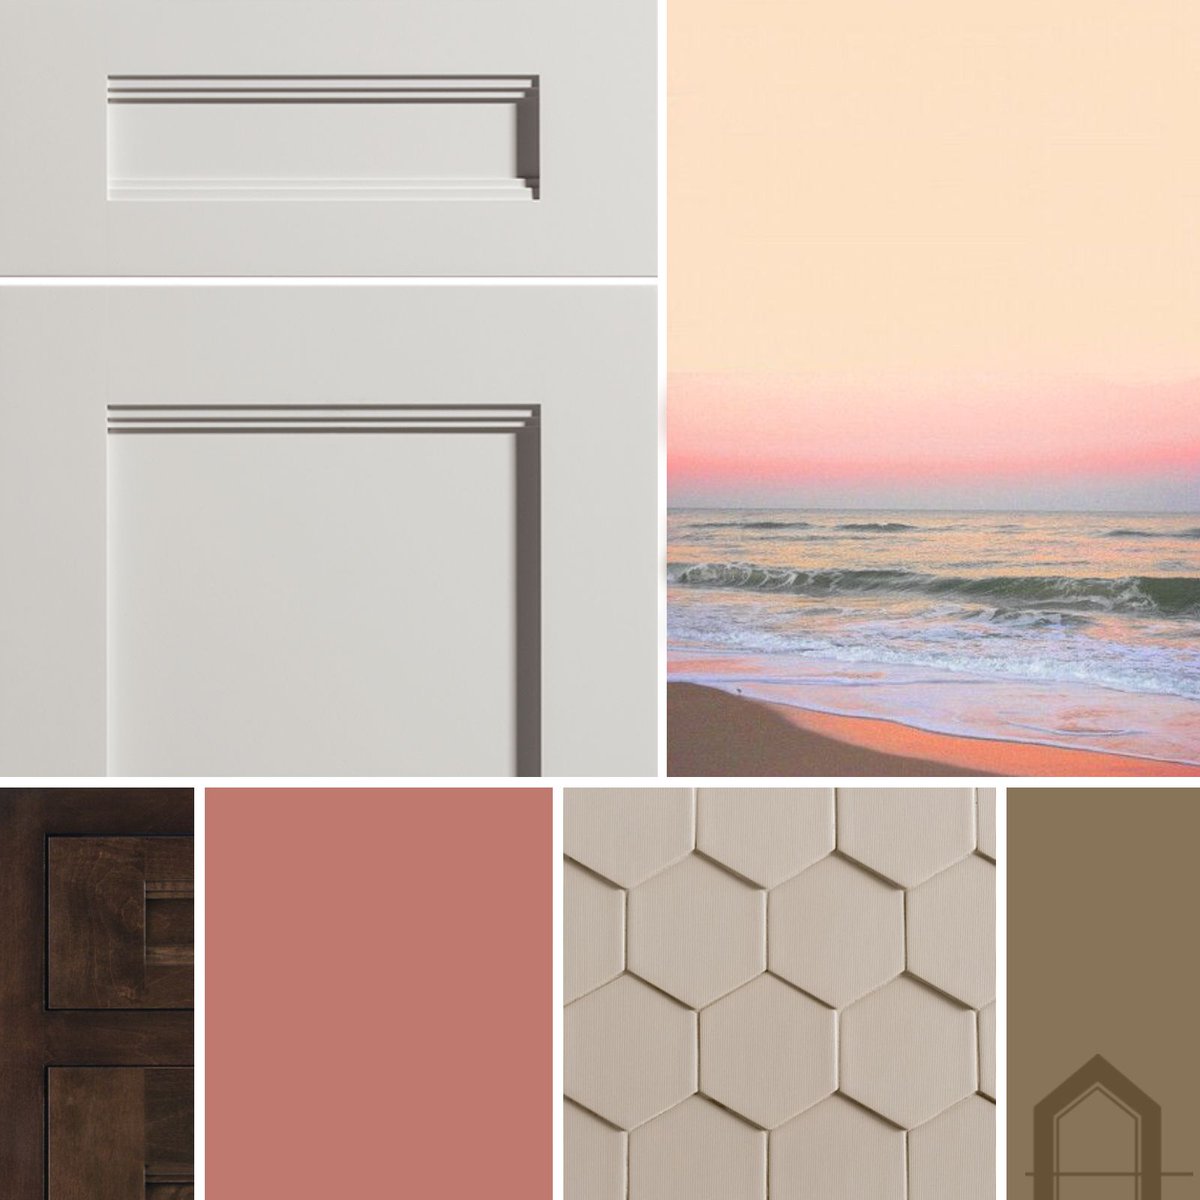 We were inspired by the Heart palette from @SherwinWilliams so we made a #color board 🍂
#swcolorlove #colorinspo @SWDesignPros